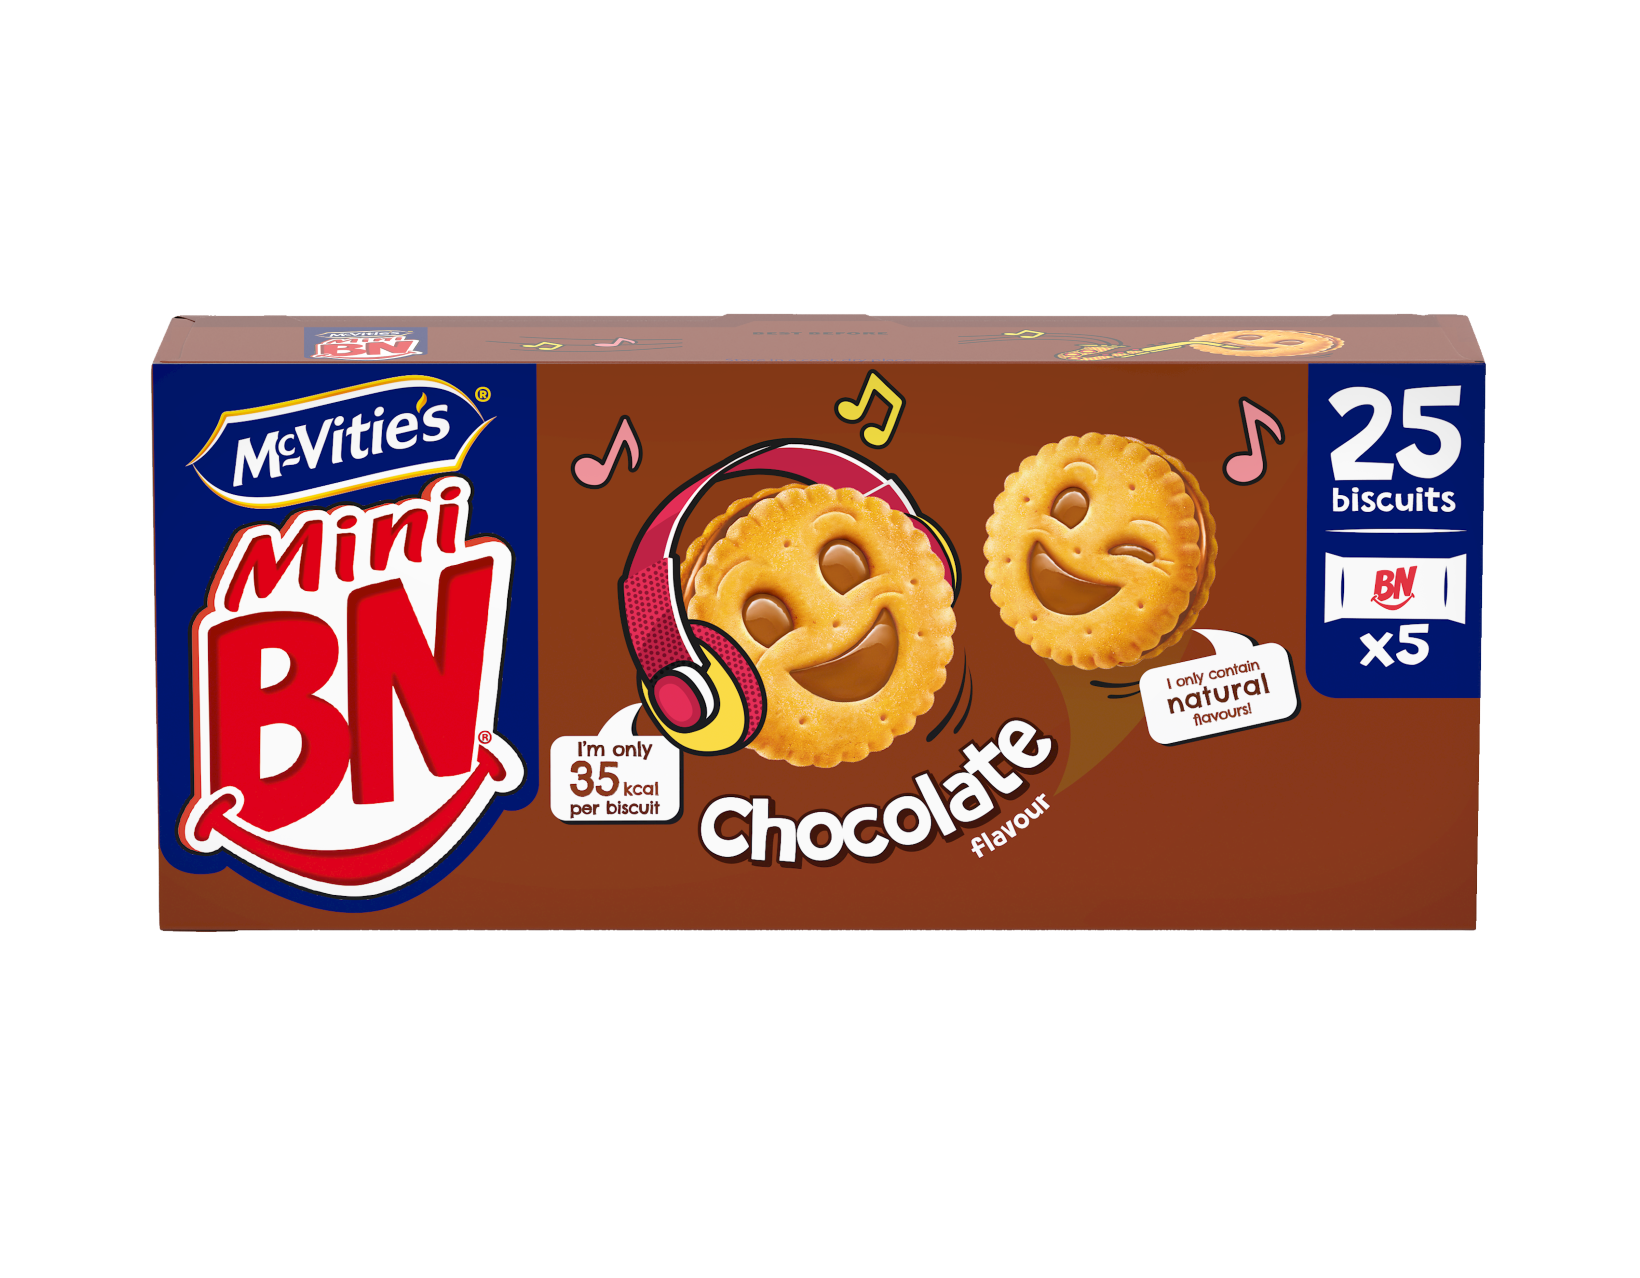 BN Biscuits  Food By Remi